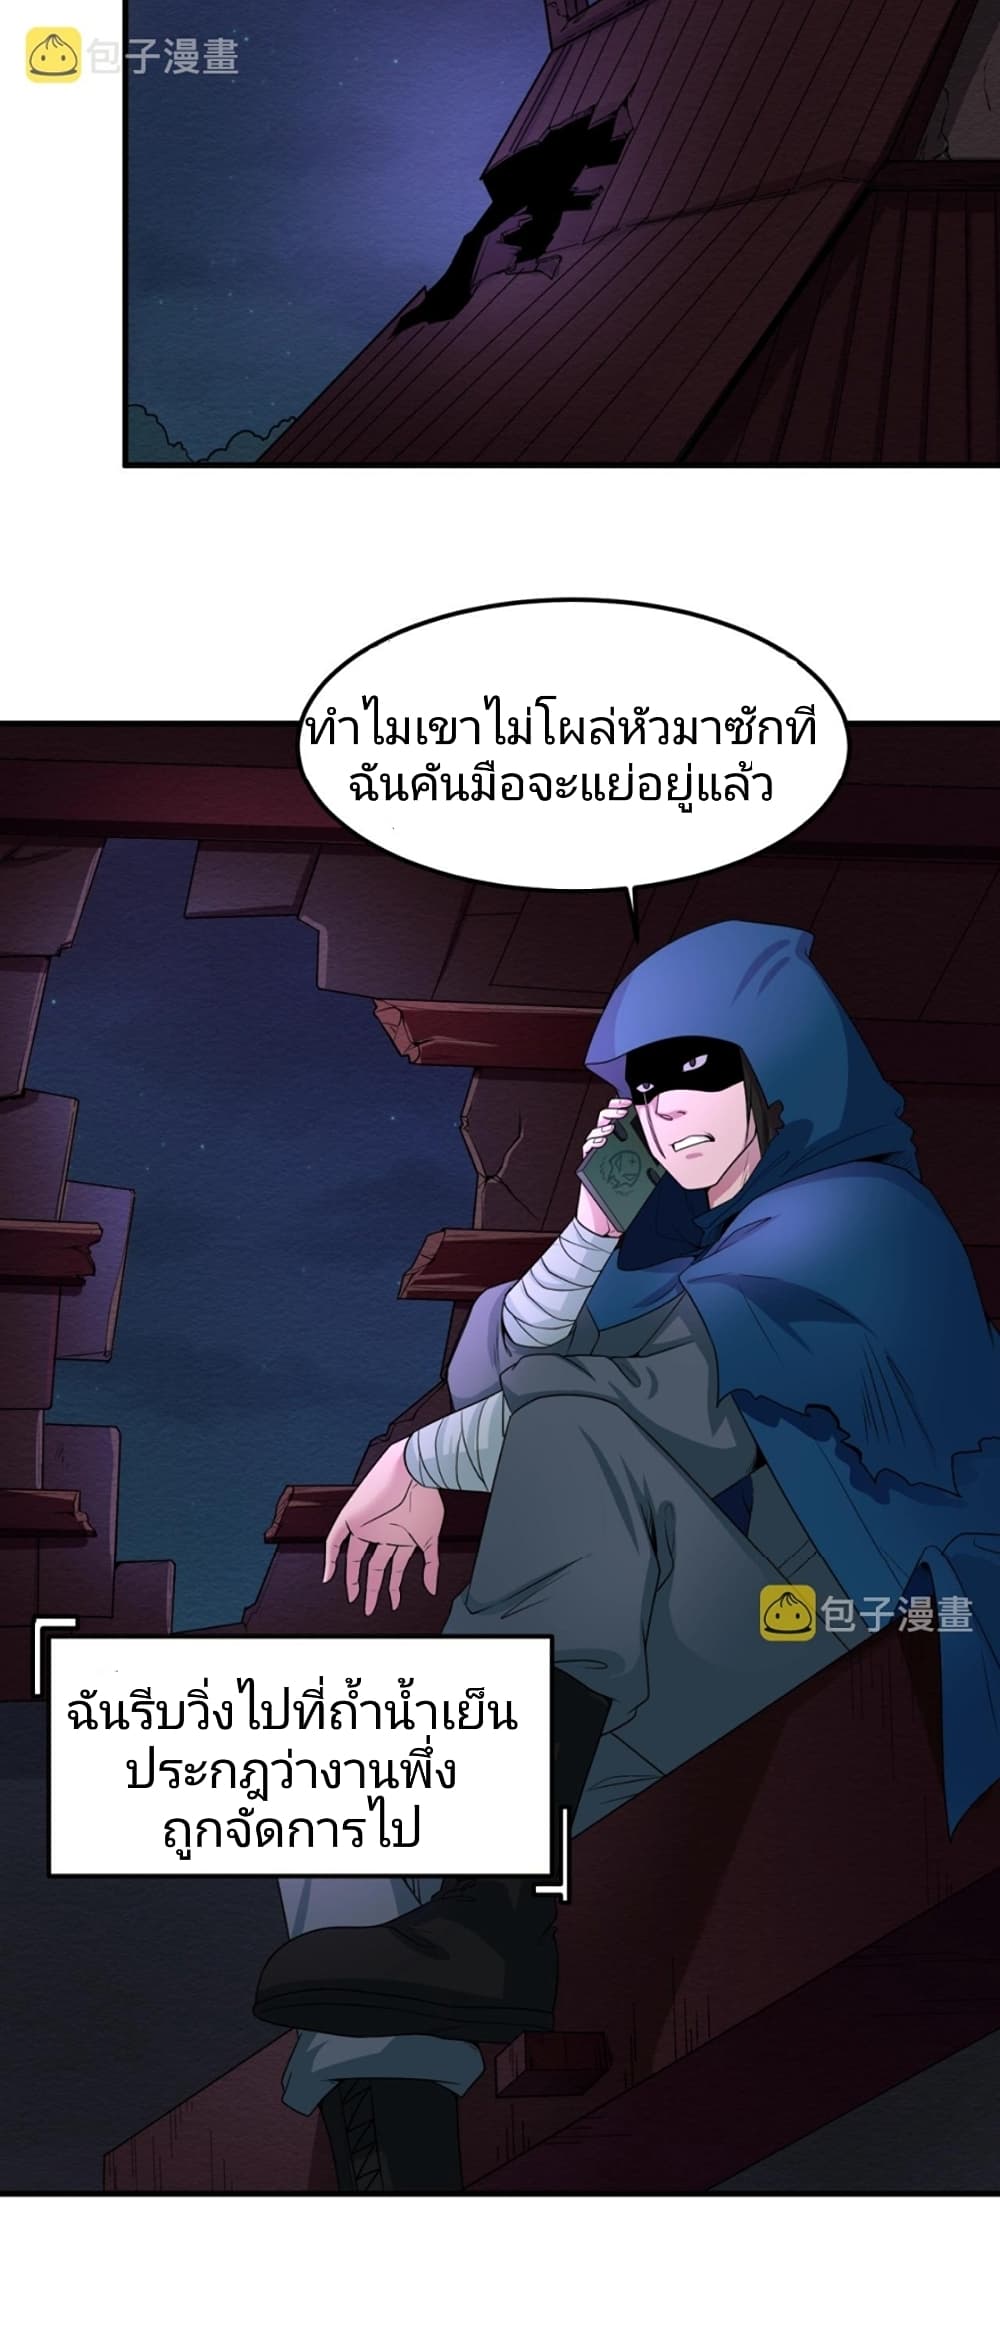 The Age of Ghost Spirits à¸à¸­à¸à¸à¸µà¹ 10 (32)